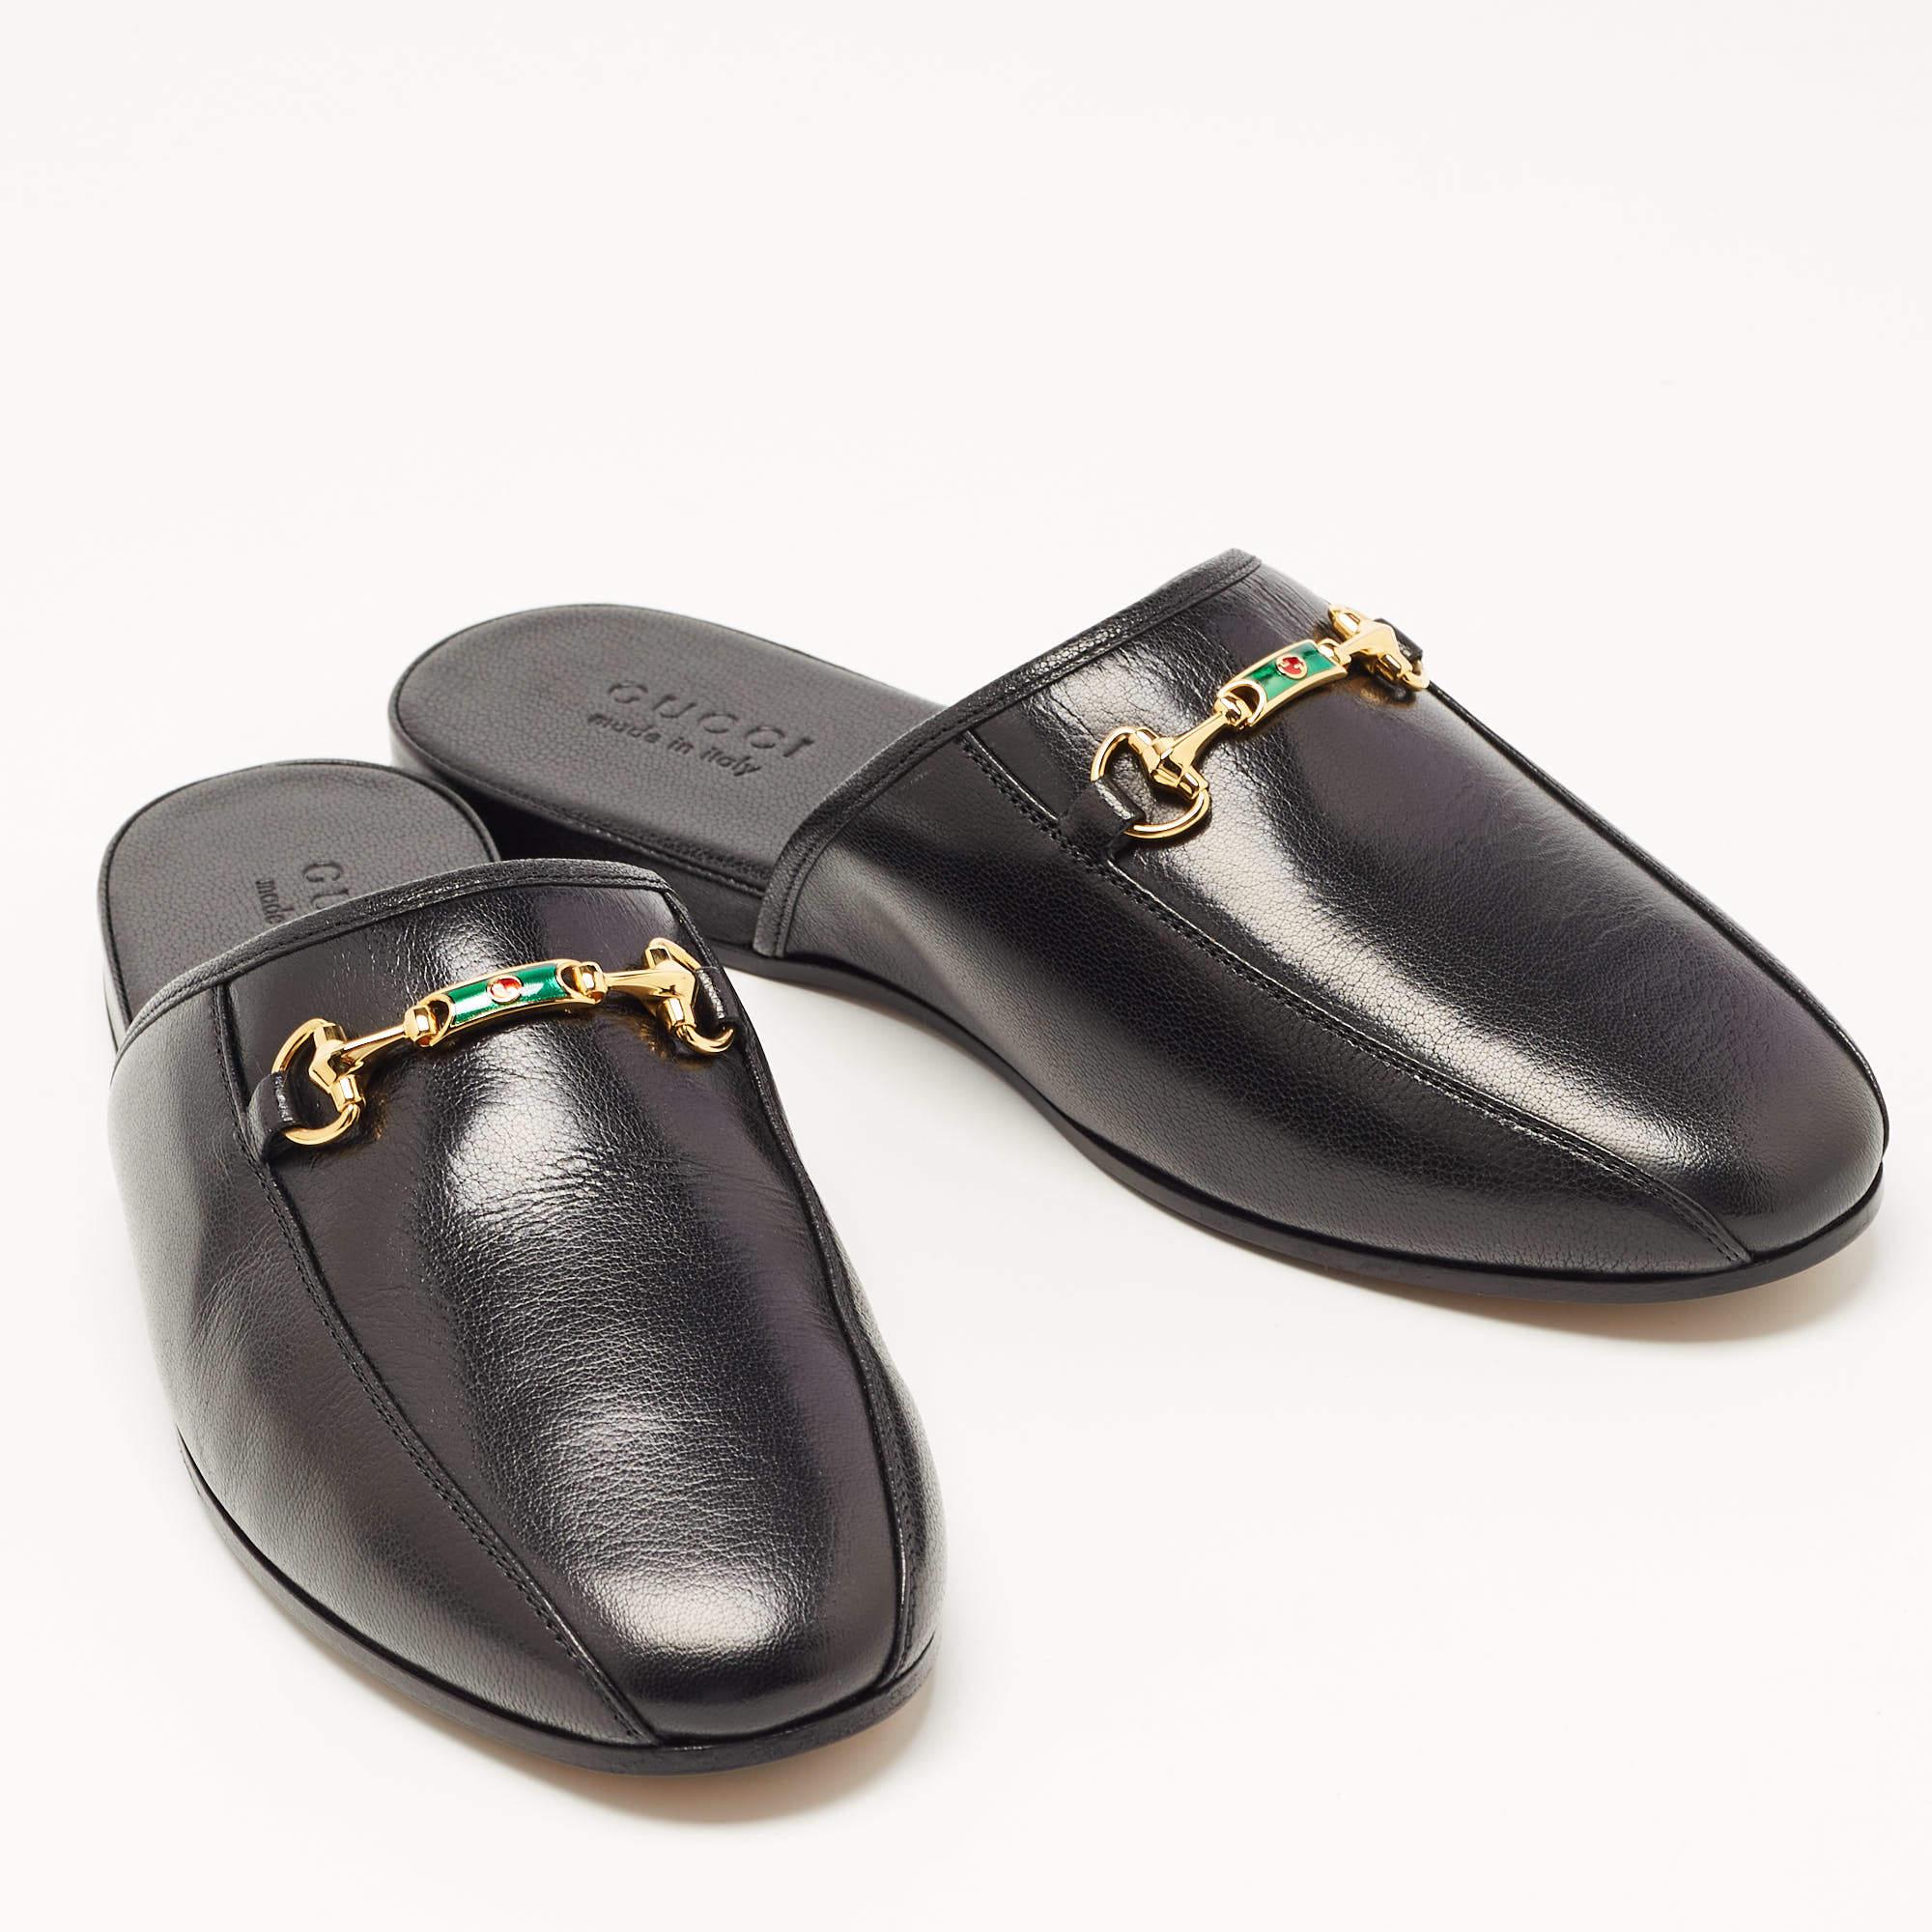 A perfect blend of luxury, style, and comfort, these designer mules are made using quality materials and frame your feet in the most refined way. They can be paired with a host of outfits from your wardrobe.

